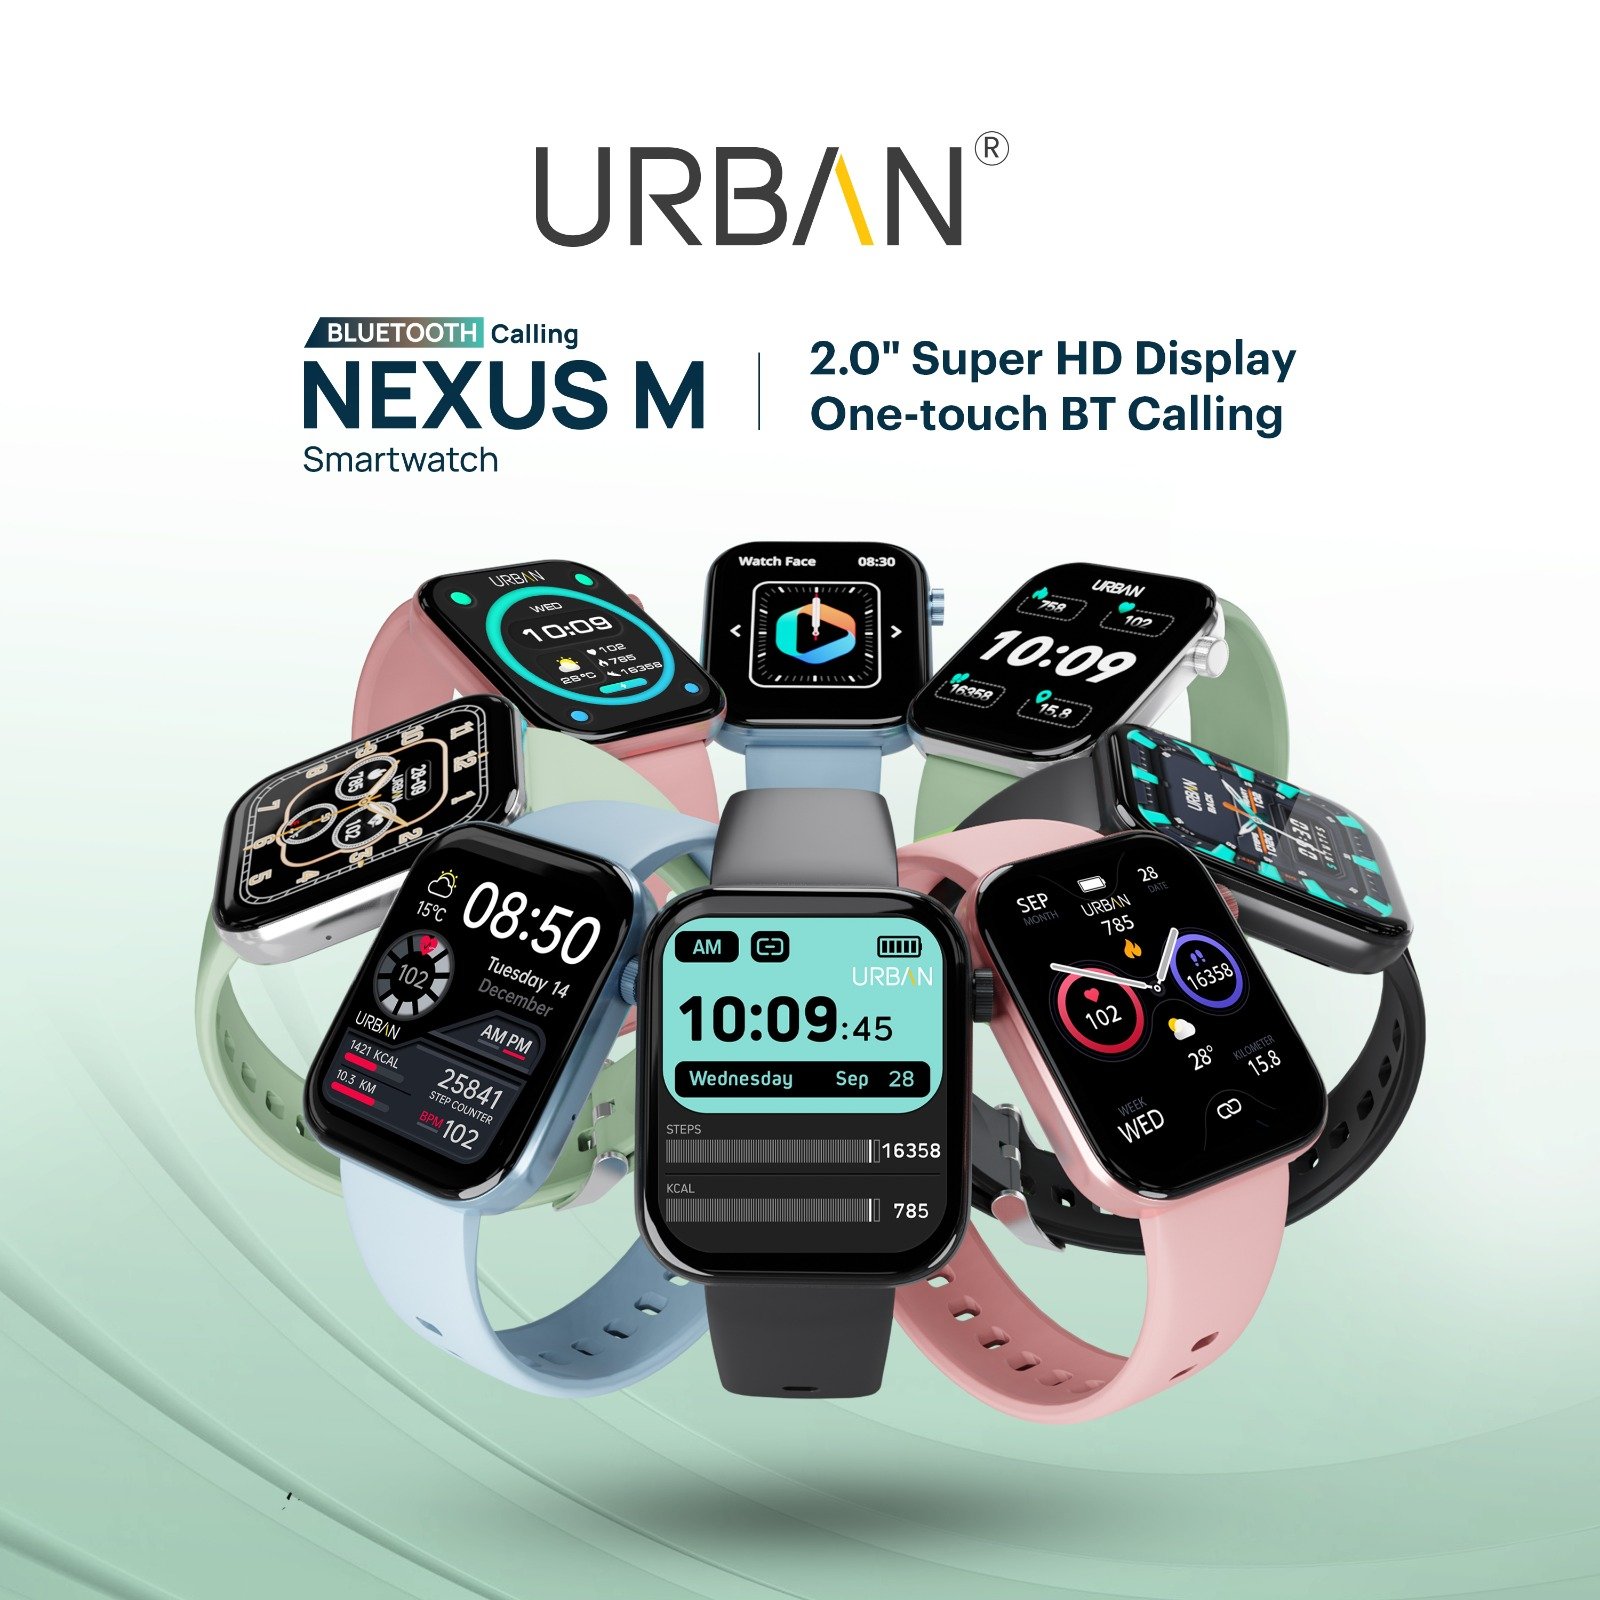 URBAN Launches Nexus M: The Ultimate Calling Smart Watch with a Massive 2-Inch Fluid HD Display, Advanced Single Sync Chipset, Exclusively on Amazon